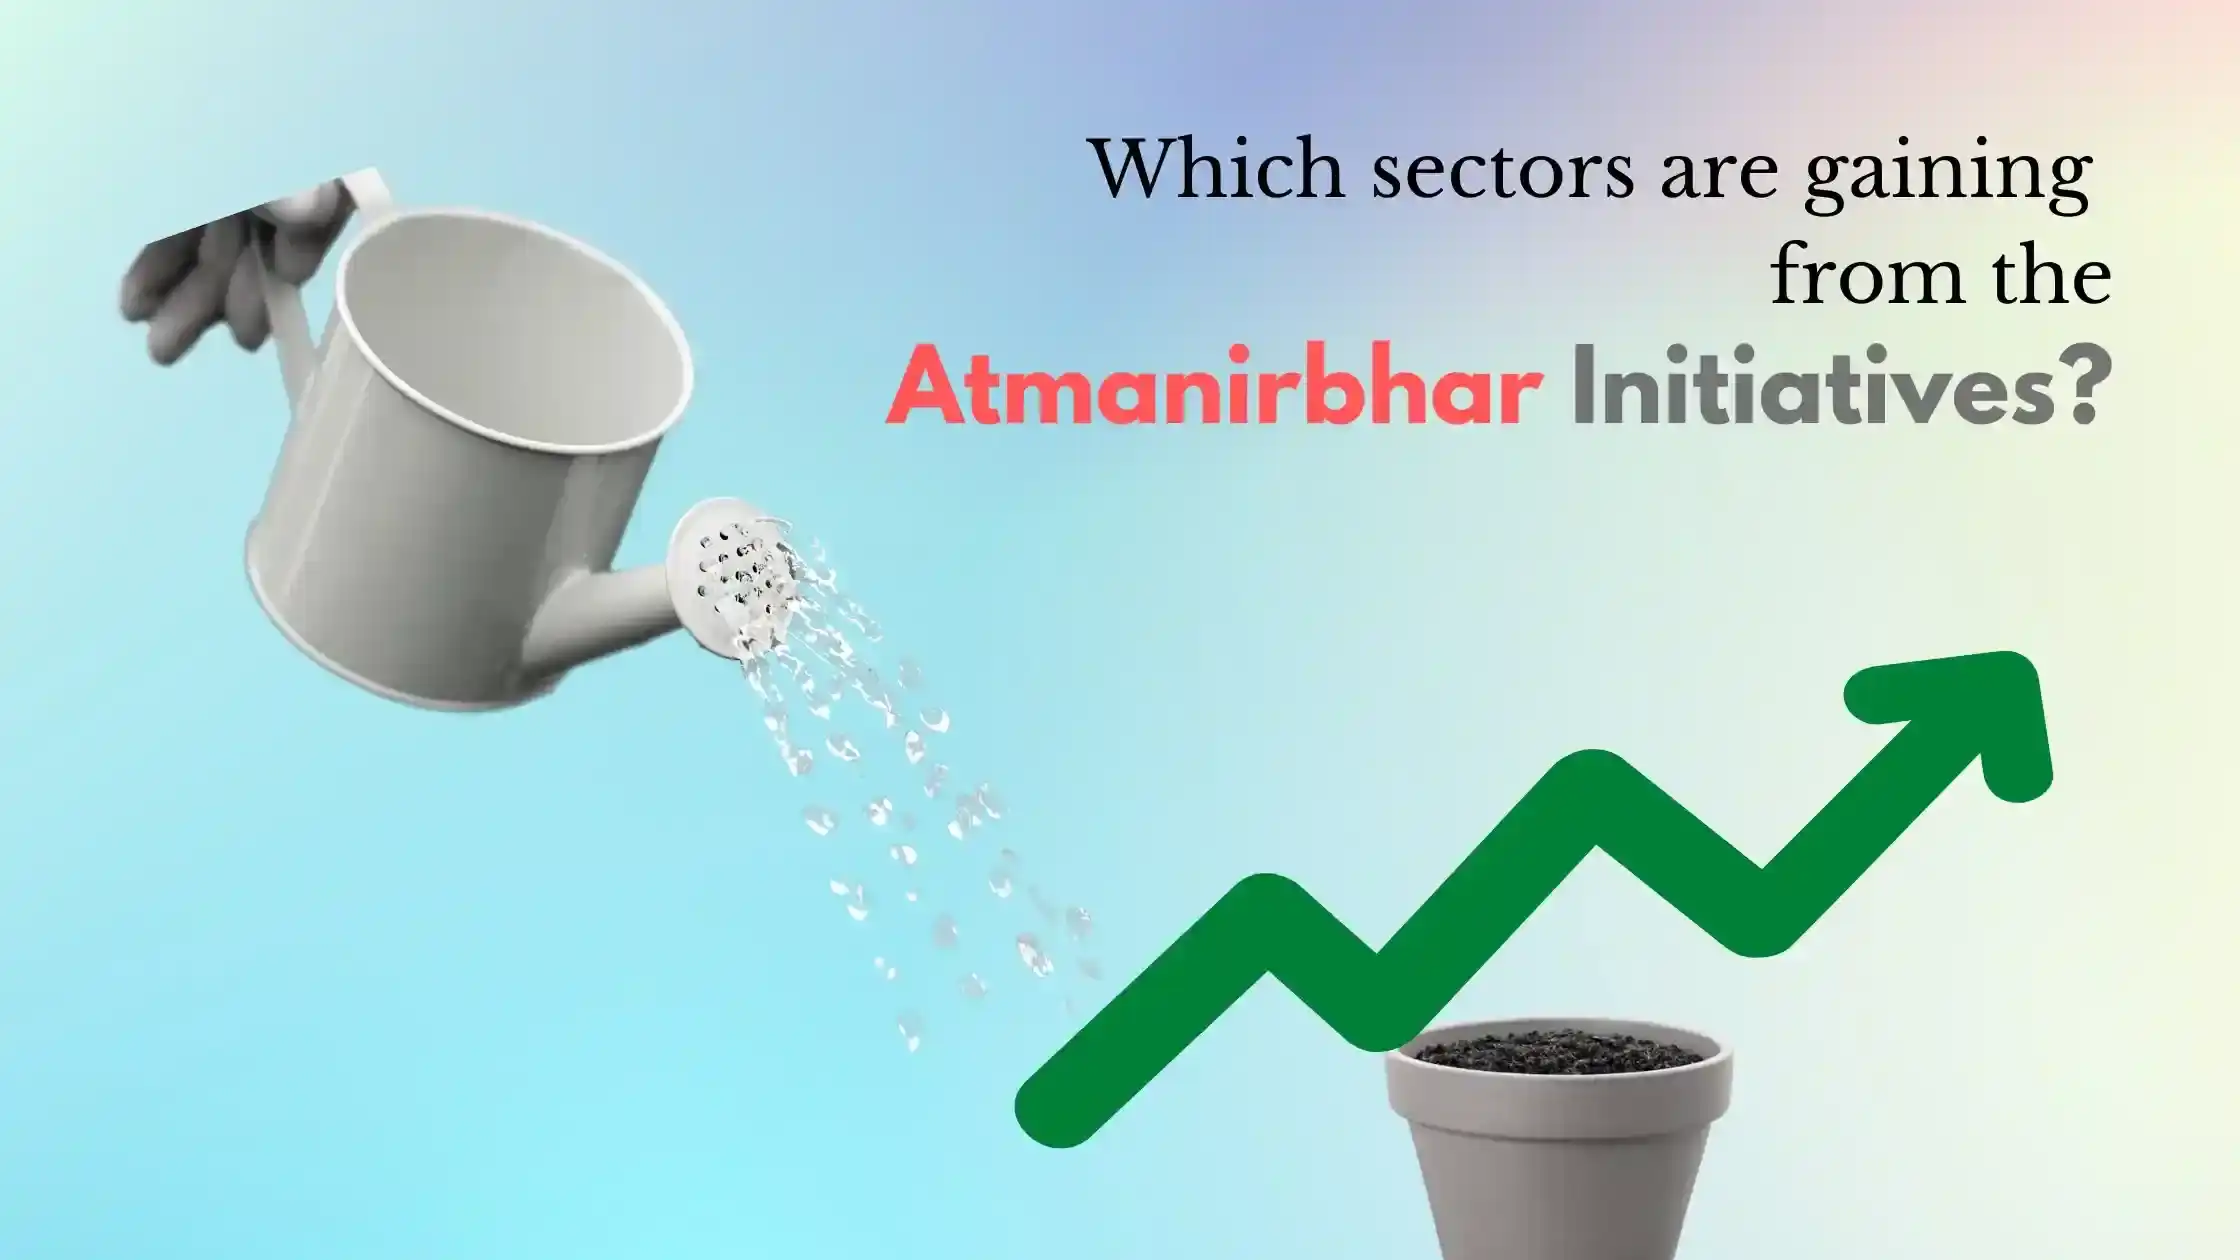 Which sectors are gaining from the atmanirbhar initiatives?